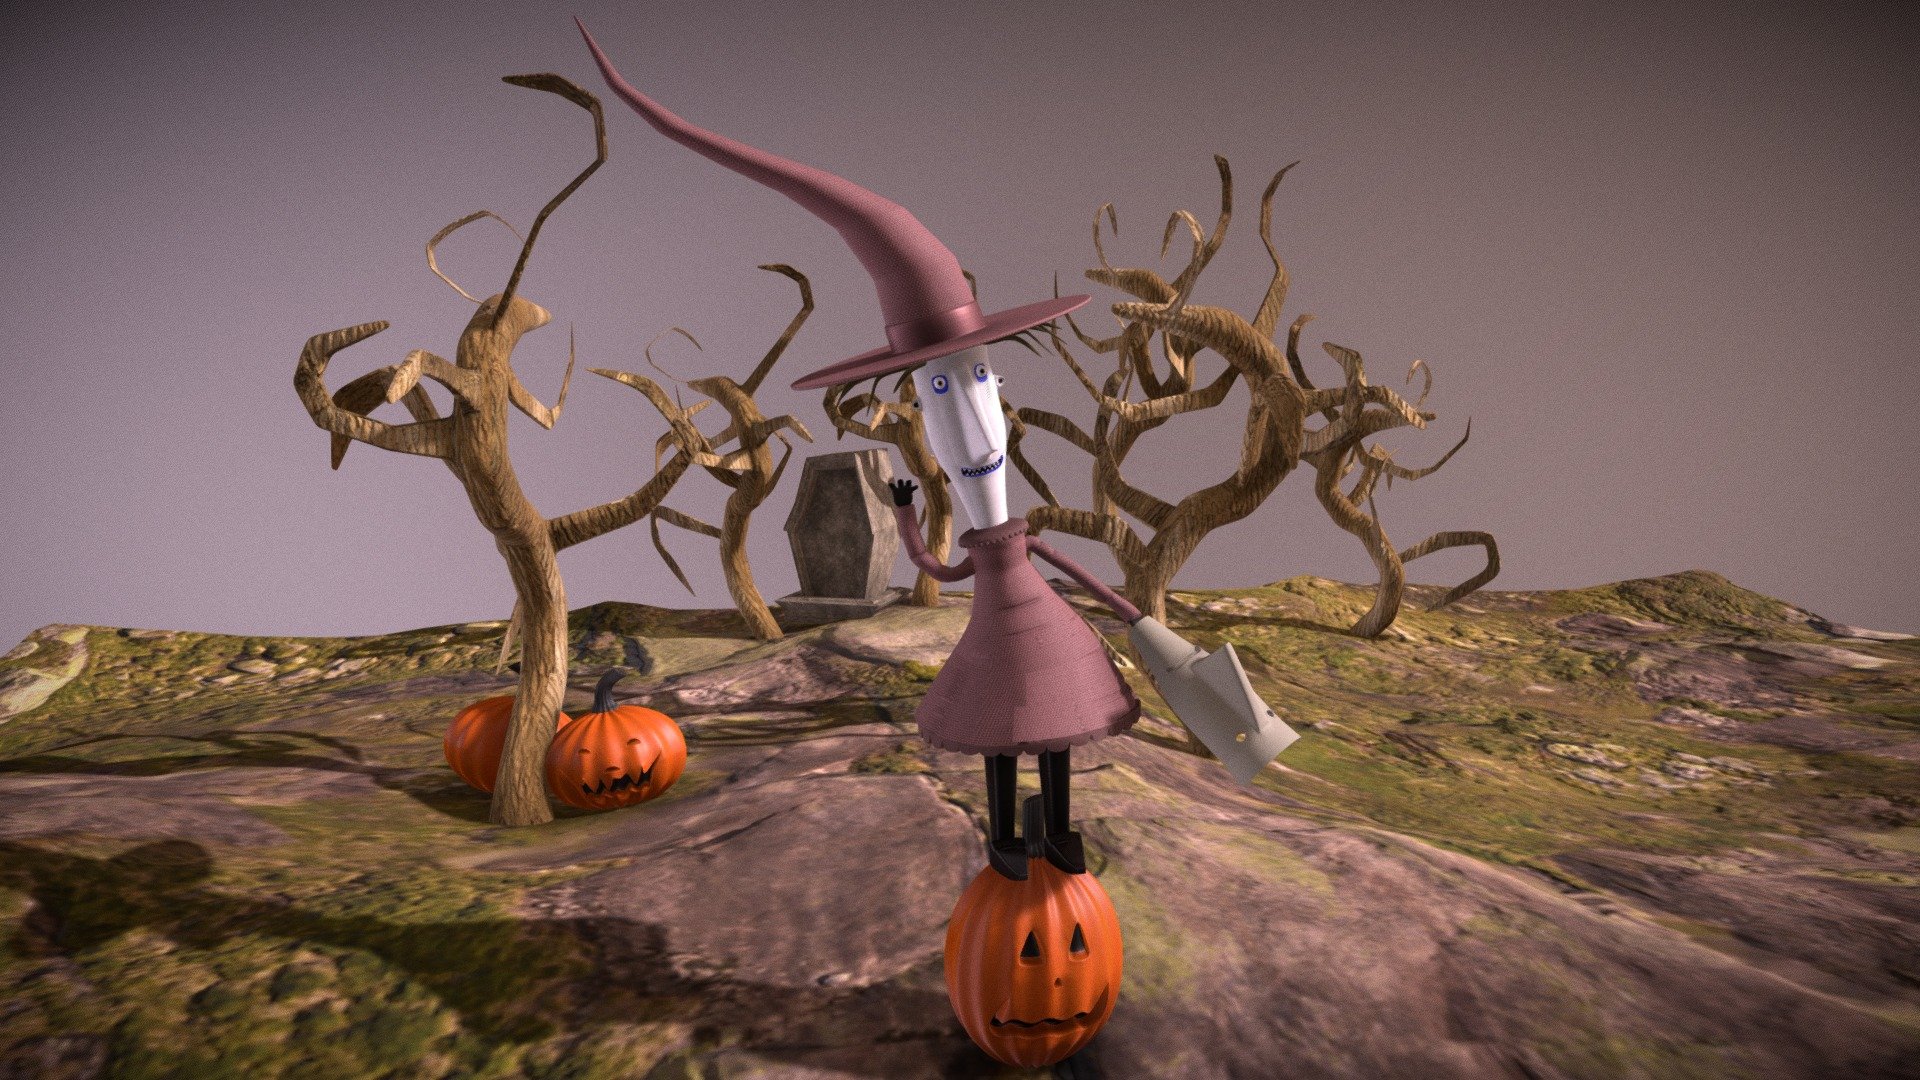 Shock by The Nightmare Before Christmas 3D model by HugoCabreth